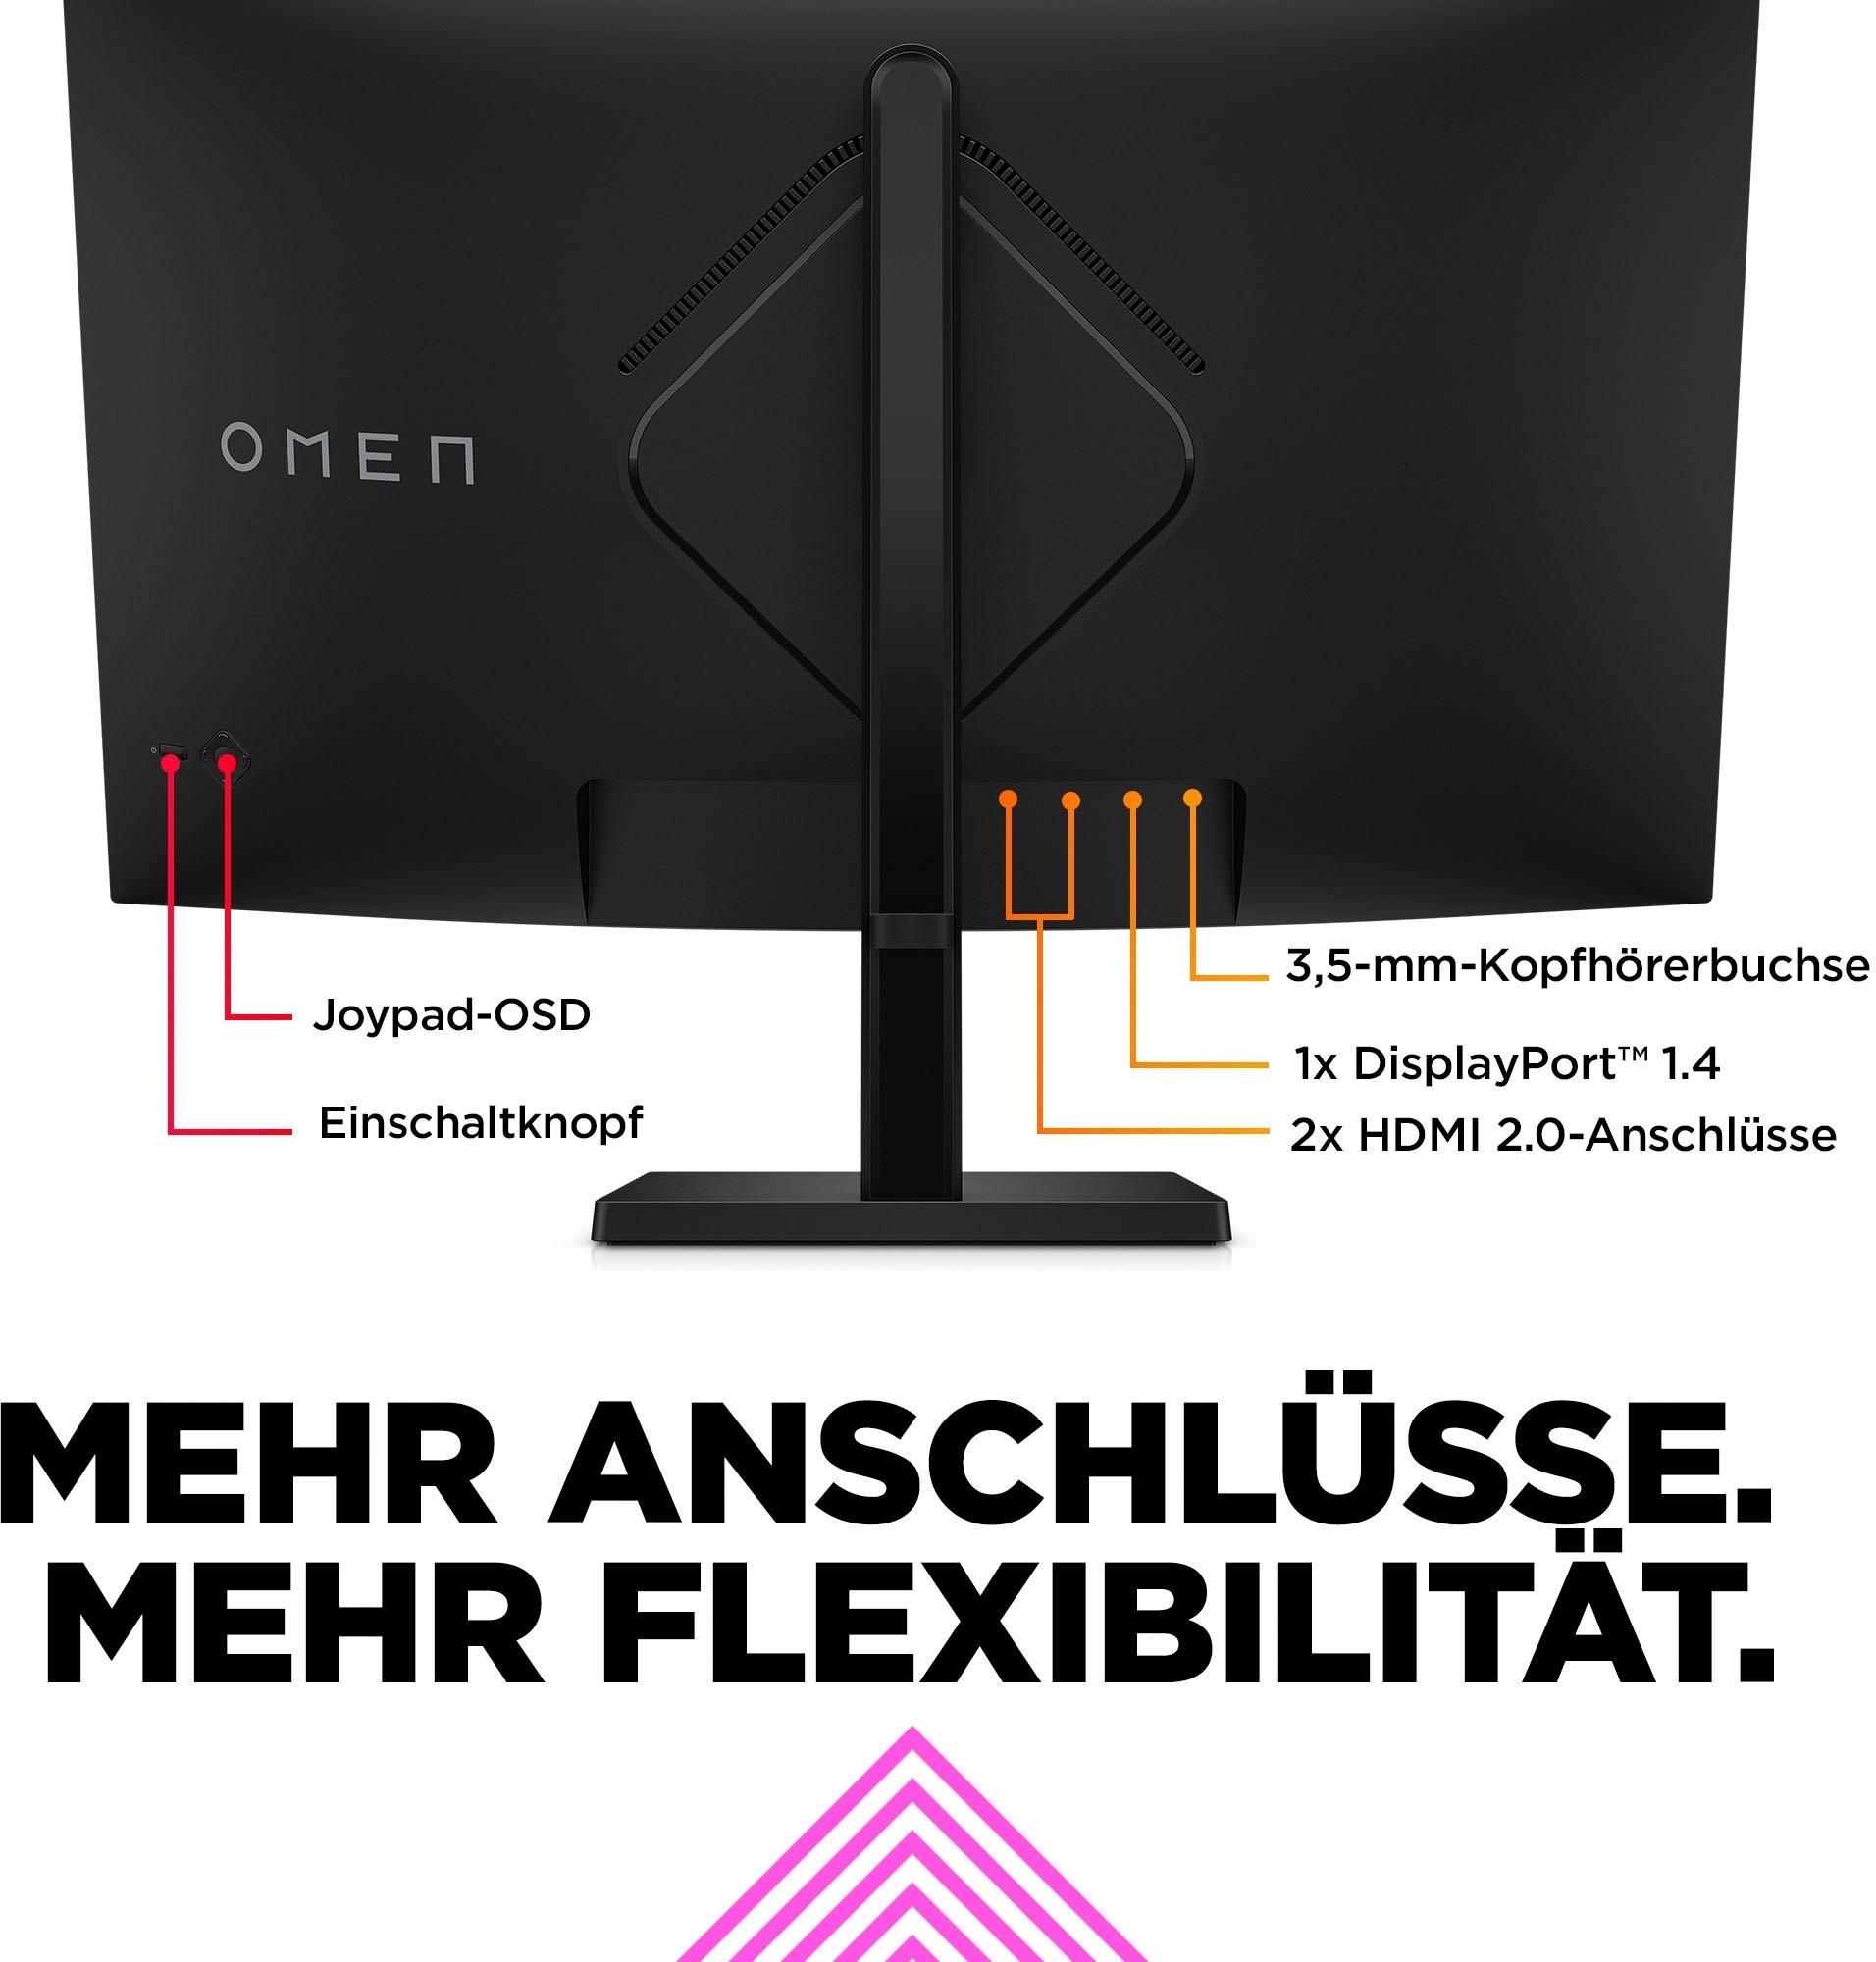 HP Curved-Gaming-Monitor »OMEN 32c (HSD-0158-A)«, 80 cm/32 Zoll, 2560 x 1440 px, QHD, 1 ms Reaktionszeit, 165 Hz